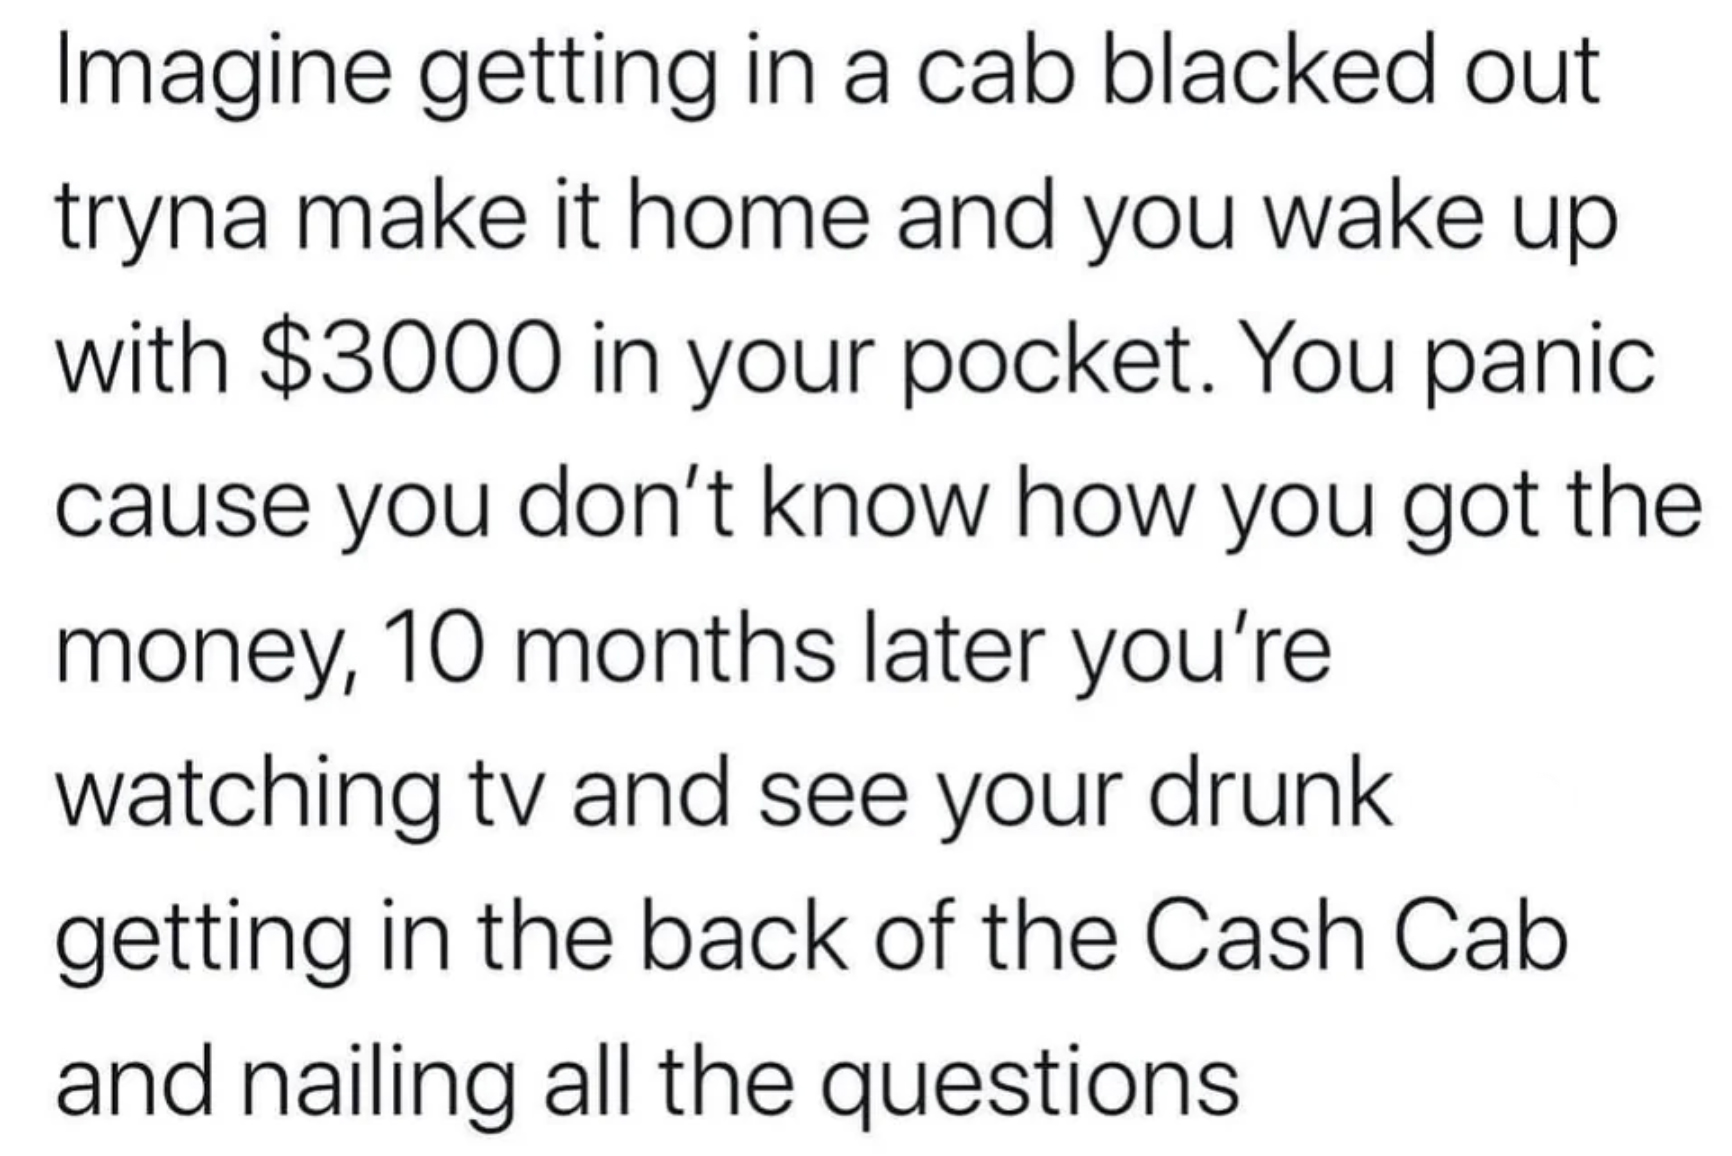 colorfulness - Imagine getting in a cab blacked out tryna make it home and you wake up with $3000 in your pocket. You panic cause you don't know how you got the money, 10 months later you're watching tv and see your drunk getting in the back of the Cash C